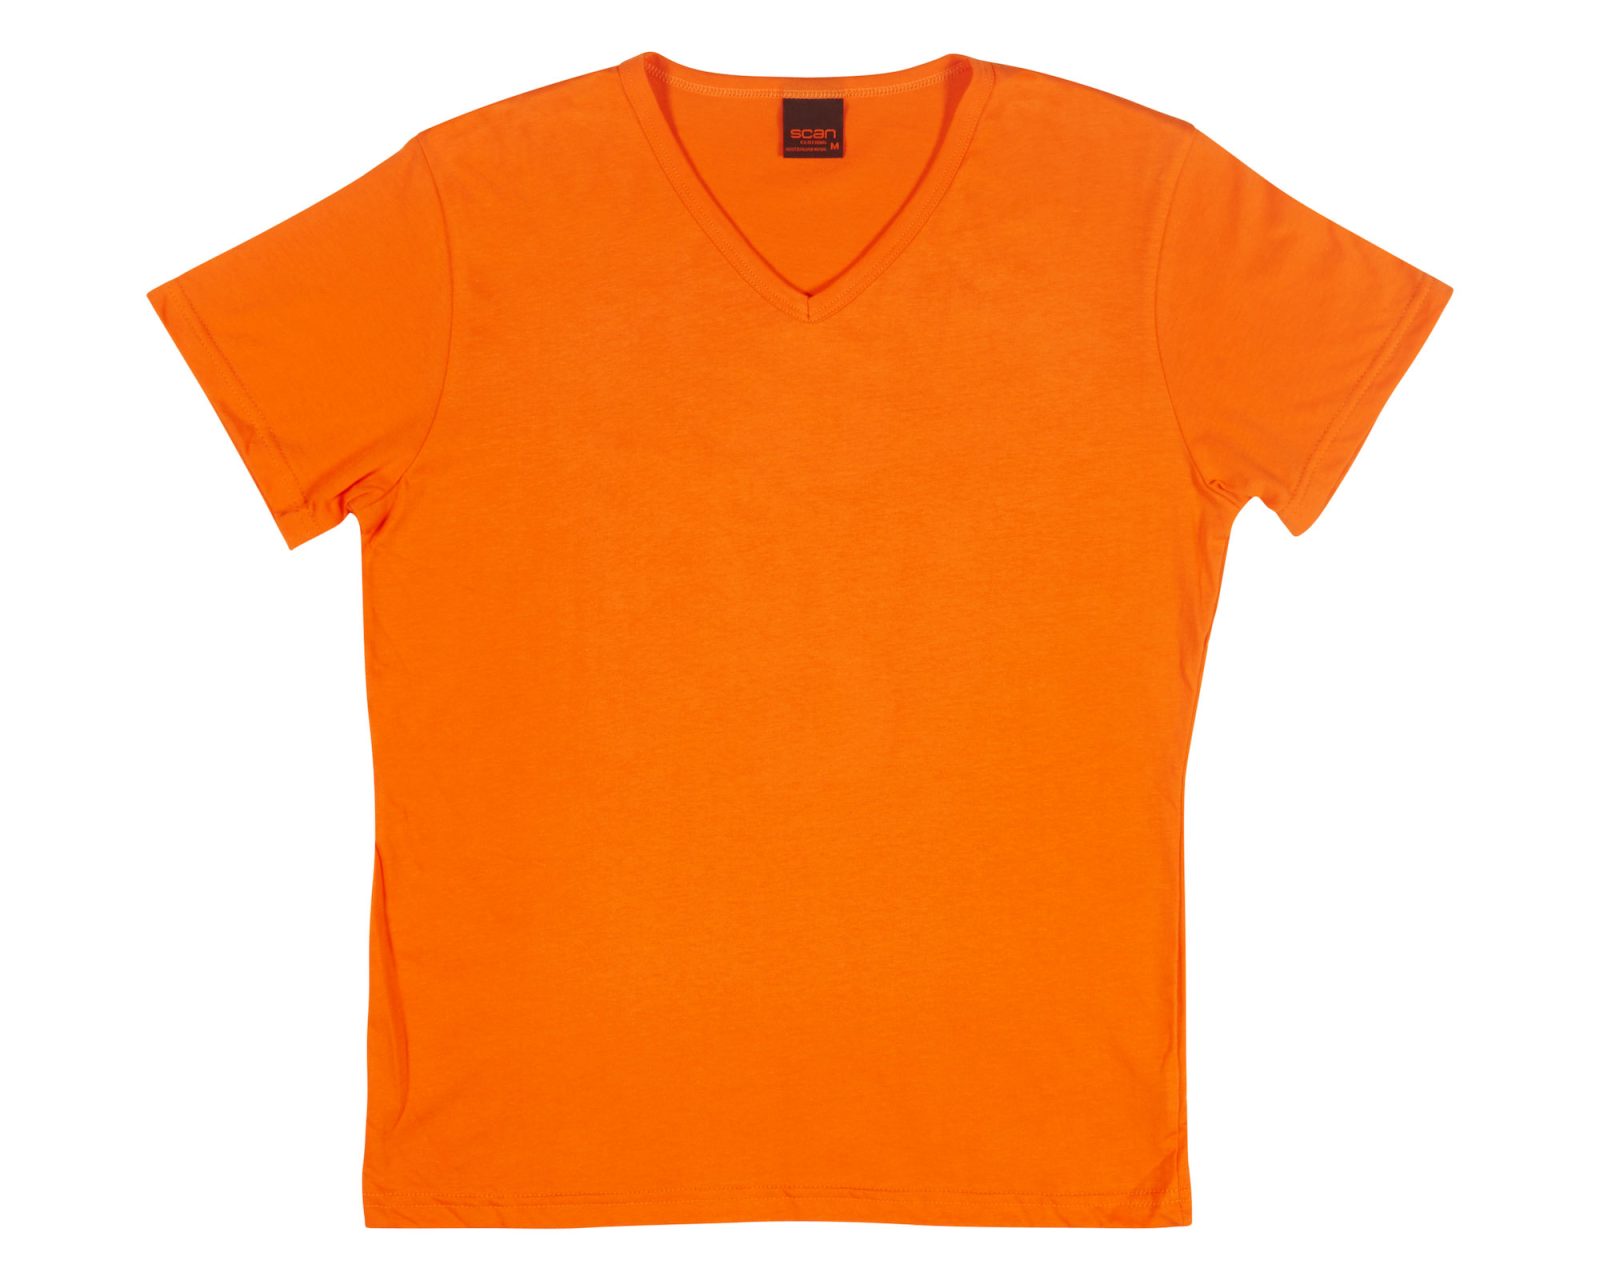 qualitops-mens-fitted-v-neck-short-sleeve-tee-027-co-027